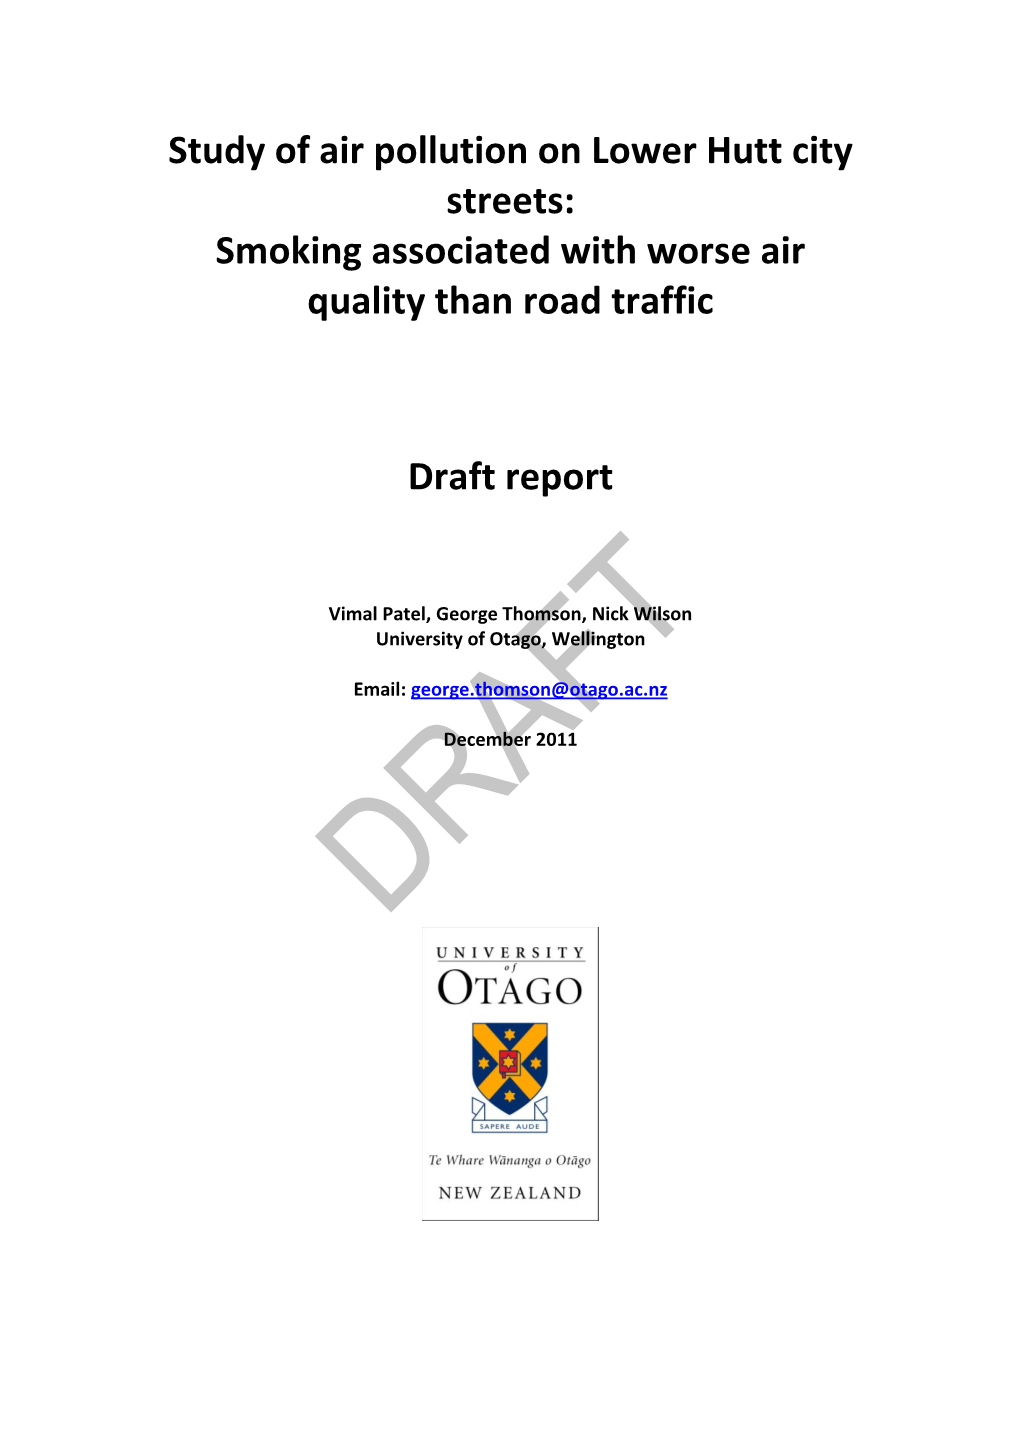 Study of Air Pollution on Lower Hutt City Streets: Smoking Associated with Worse Air Quality Than Road Traffic